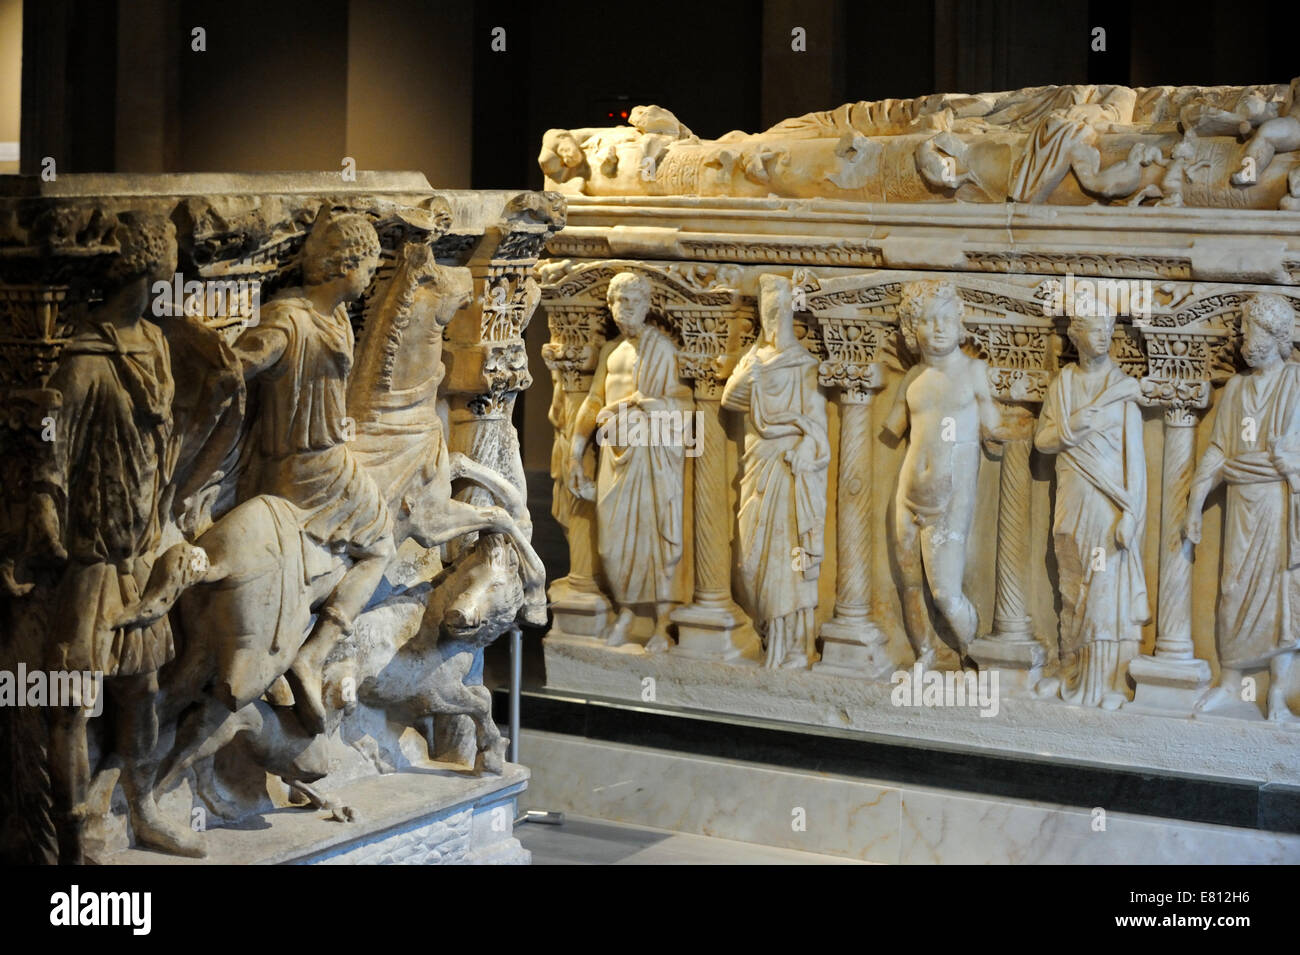 Sarcophagi from the Roman period in the Museum of Archaeology in Istanbul Stock Photo